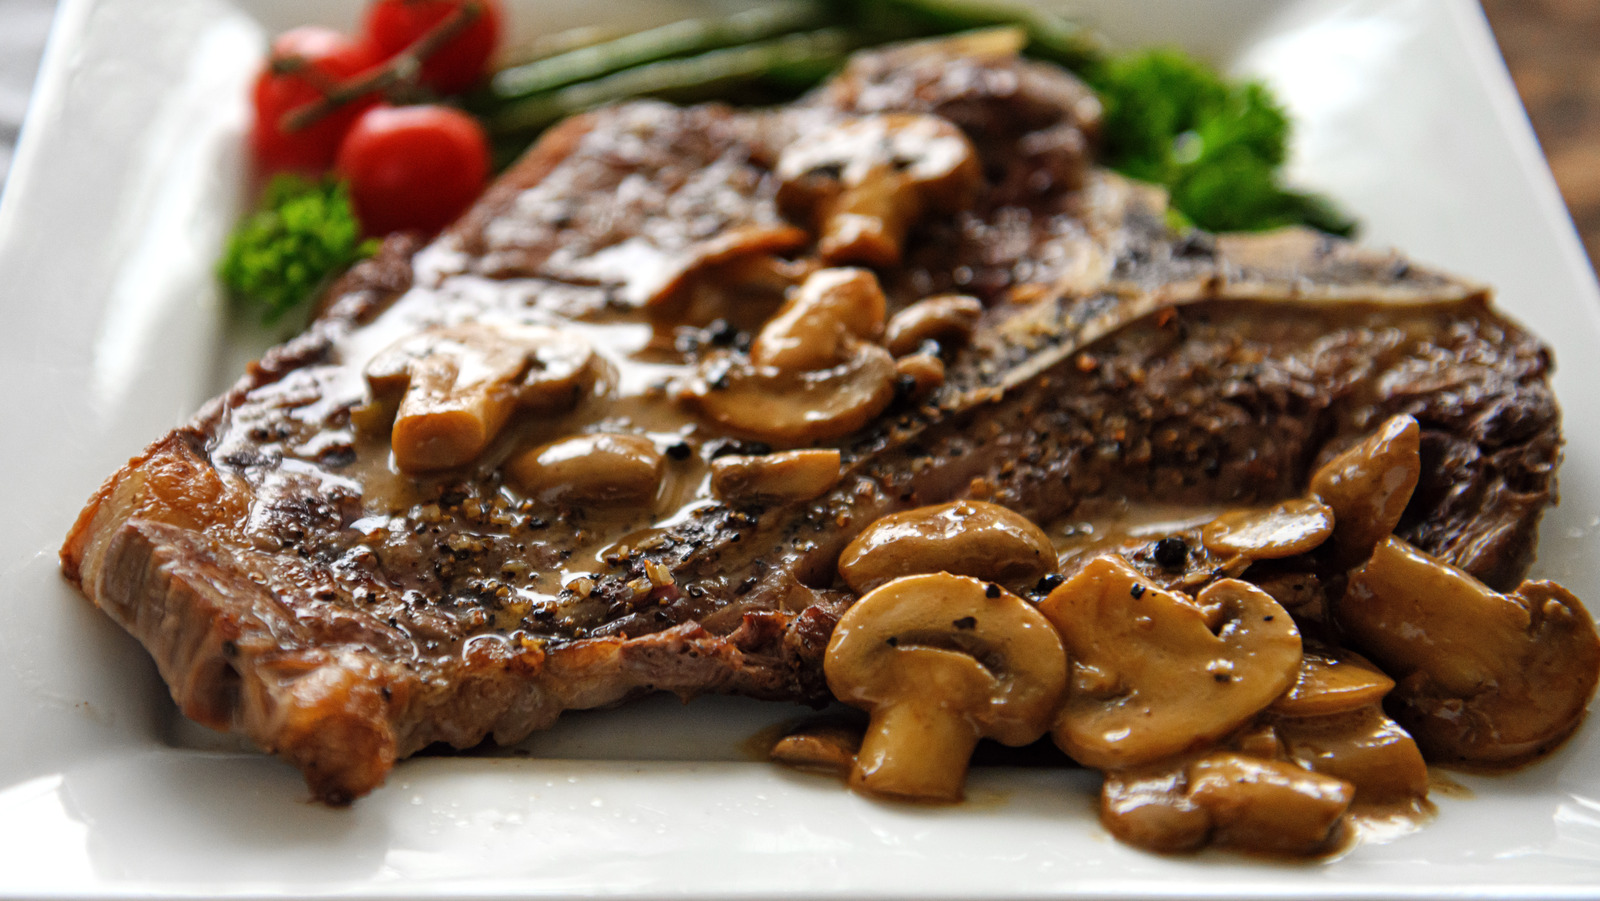 Amp Up Your Steak With A Rich Burgundy Mushroom Sauce - Daily Meal